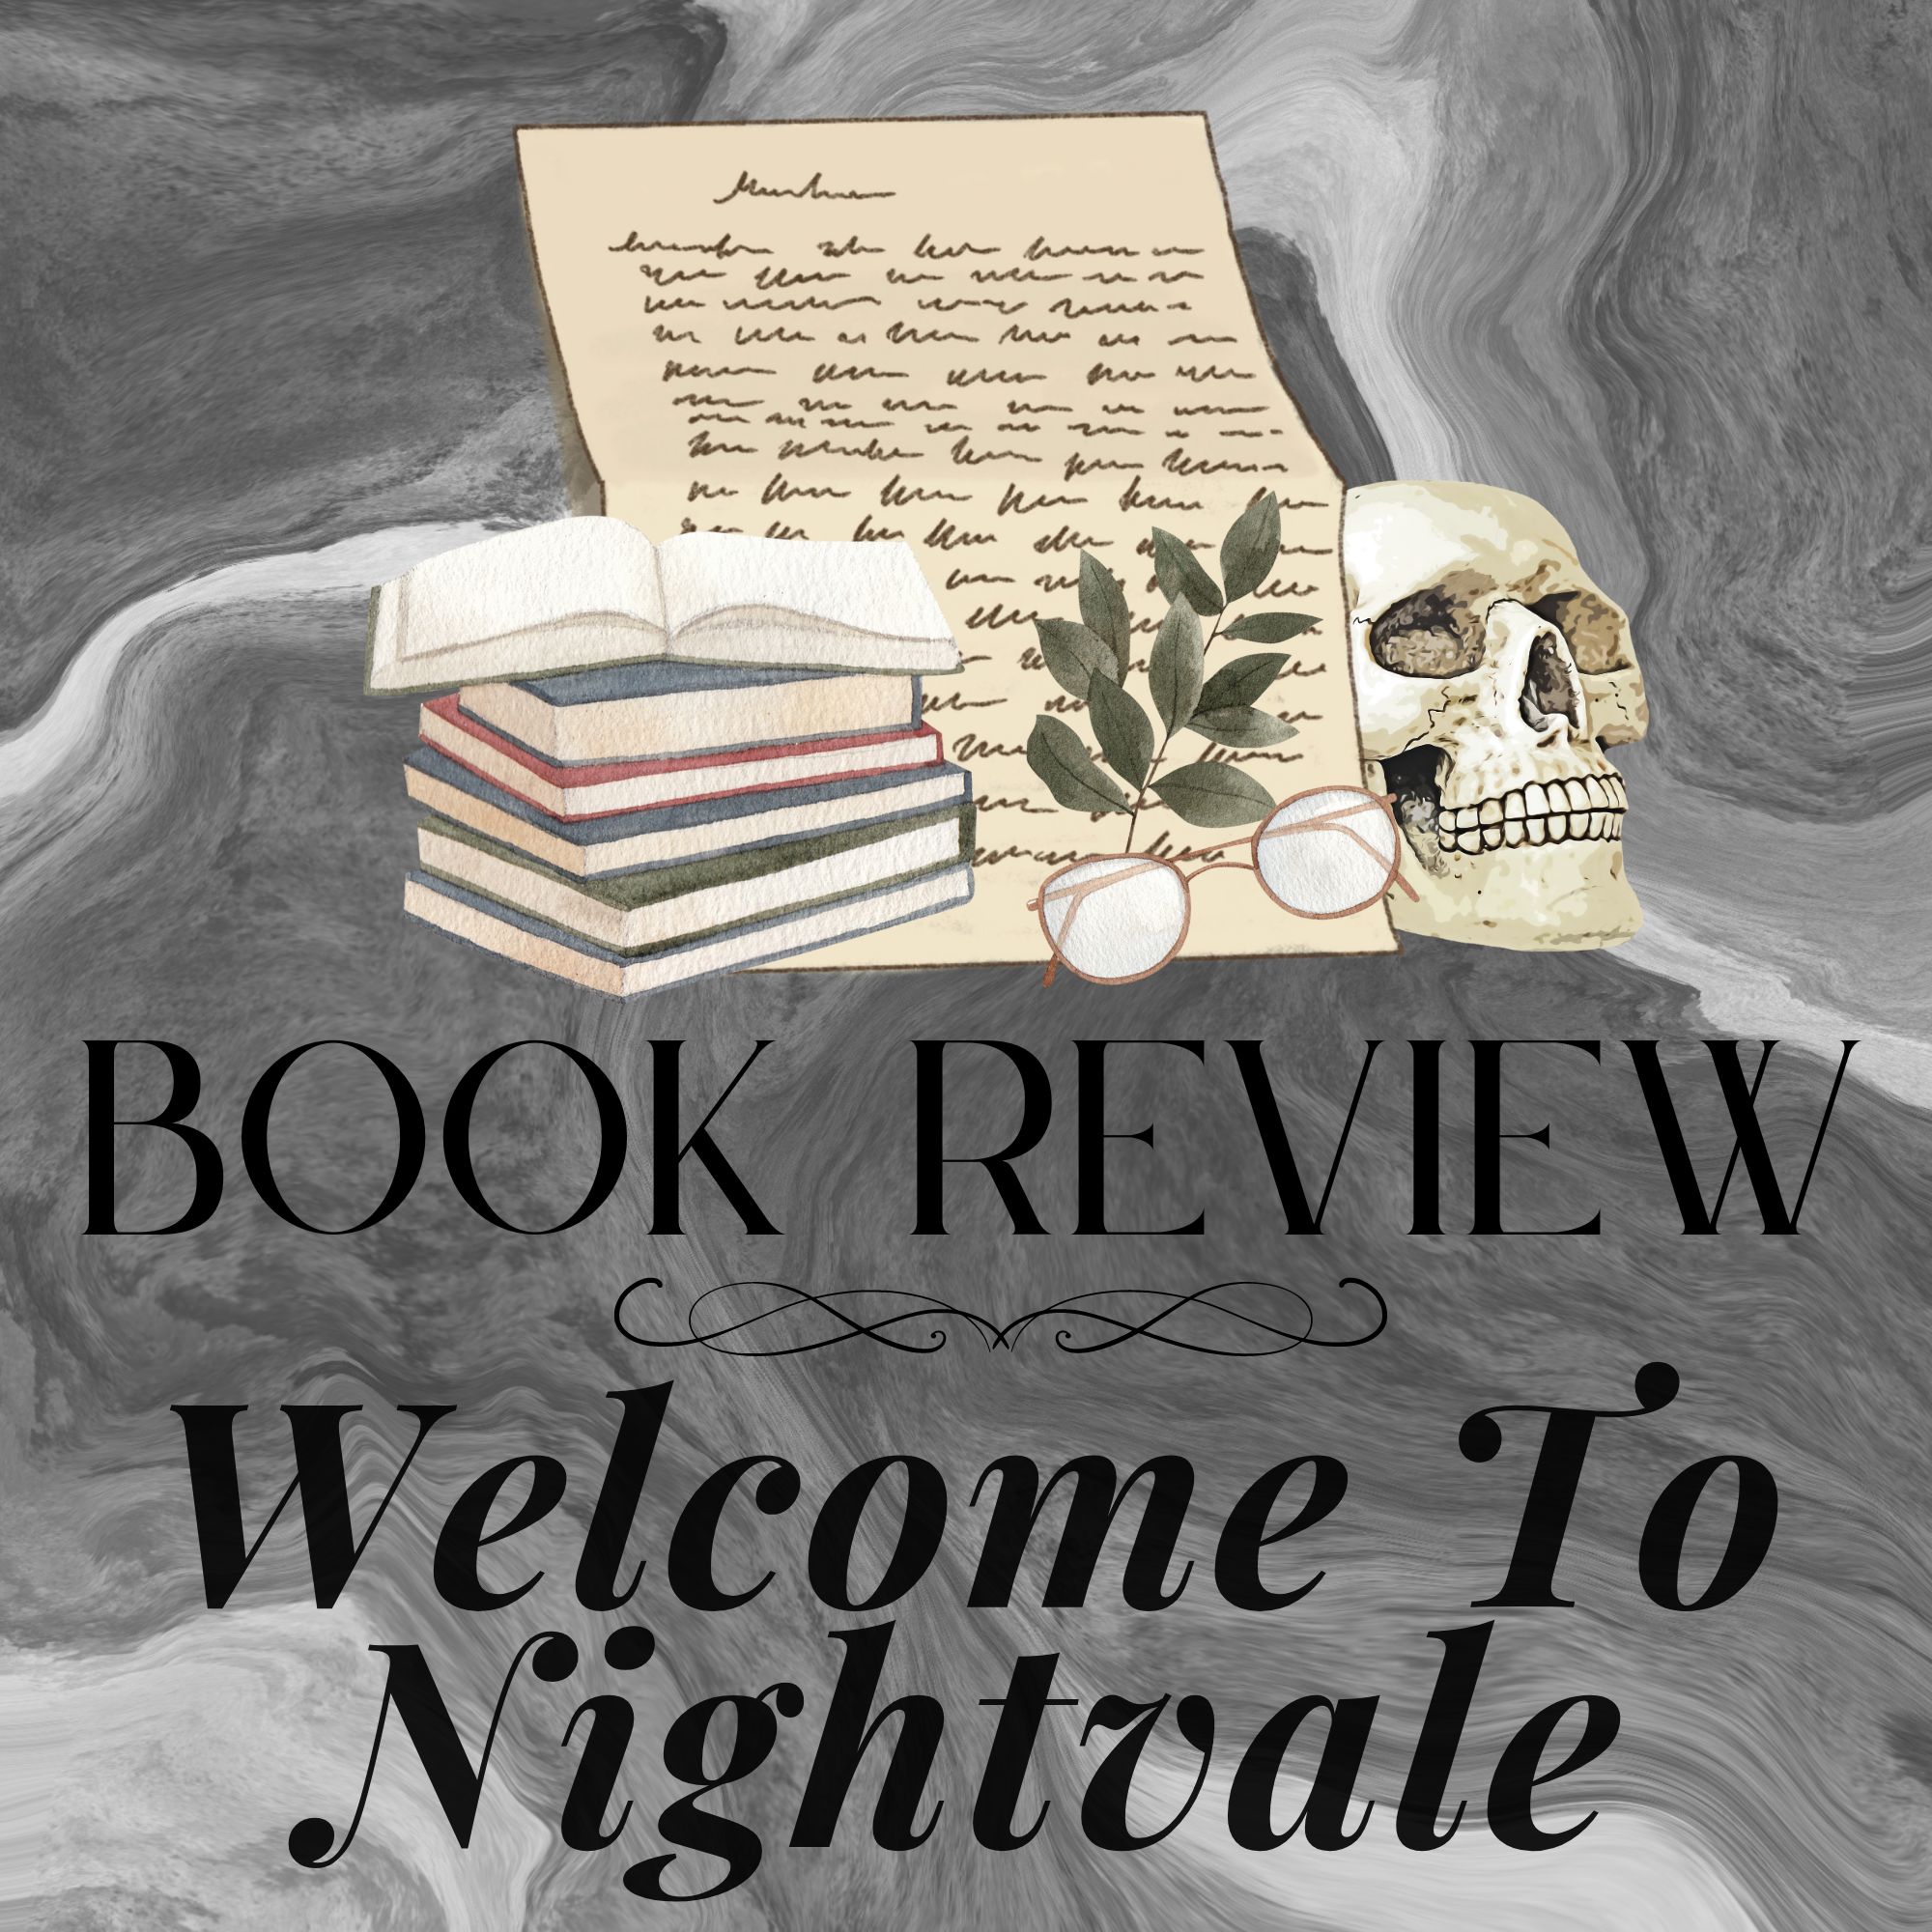 Good Reads Challenge Book Review:  Welcome to Nightvale